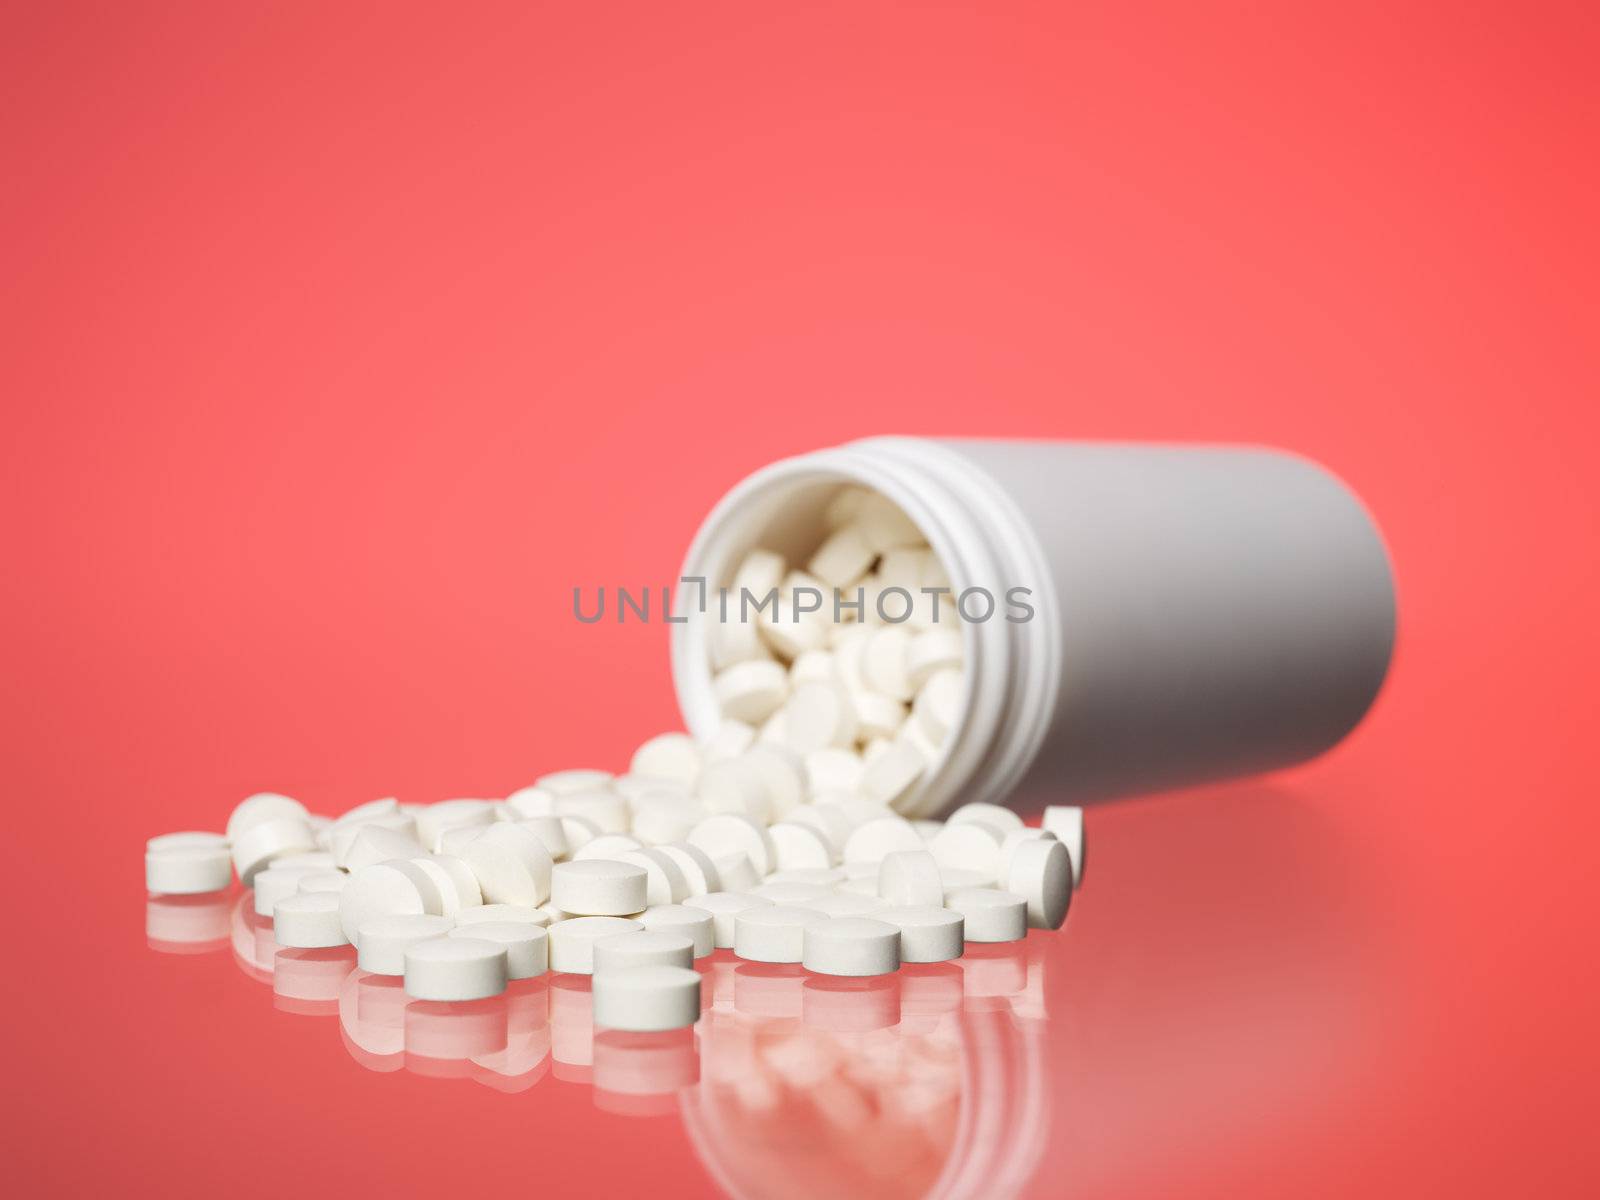 Can with pills towards red background